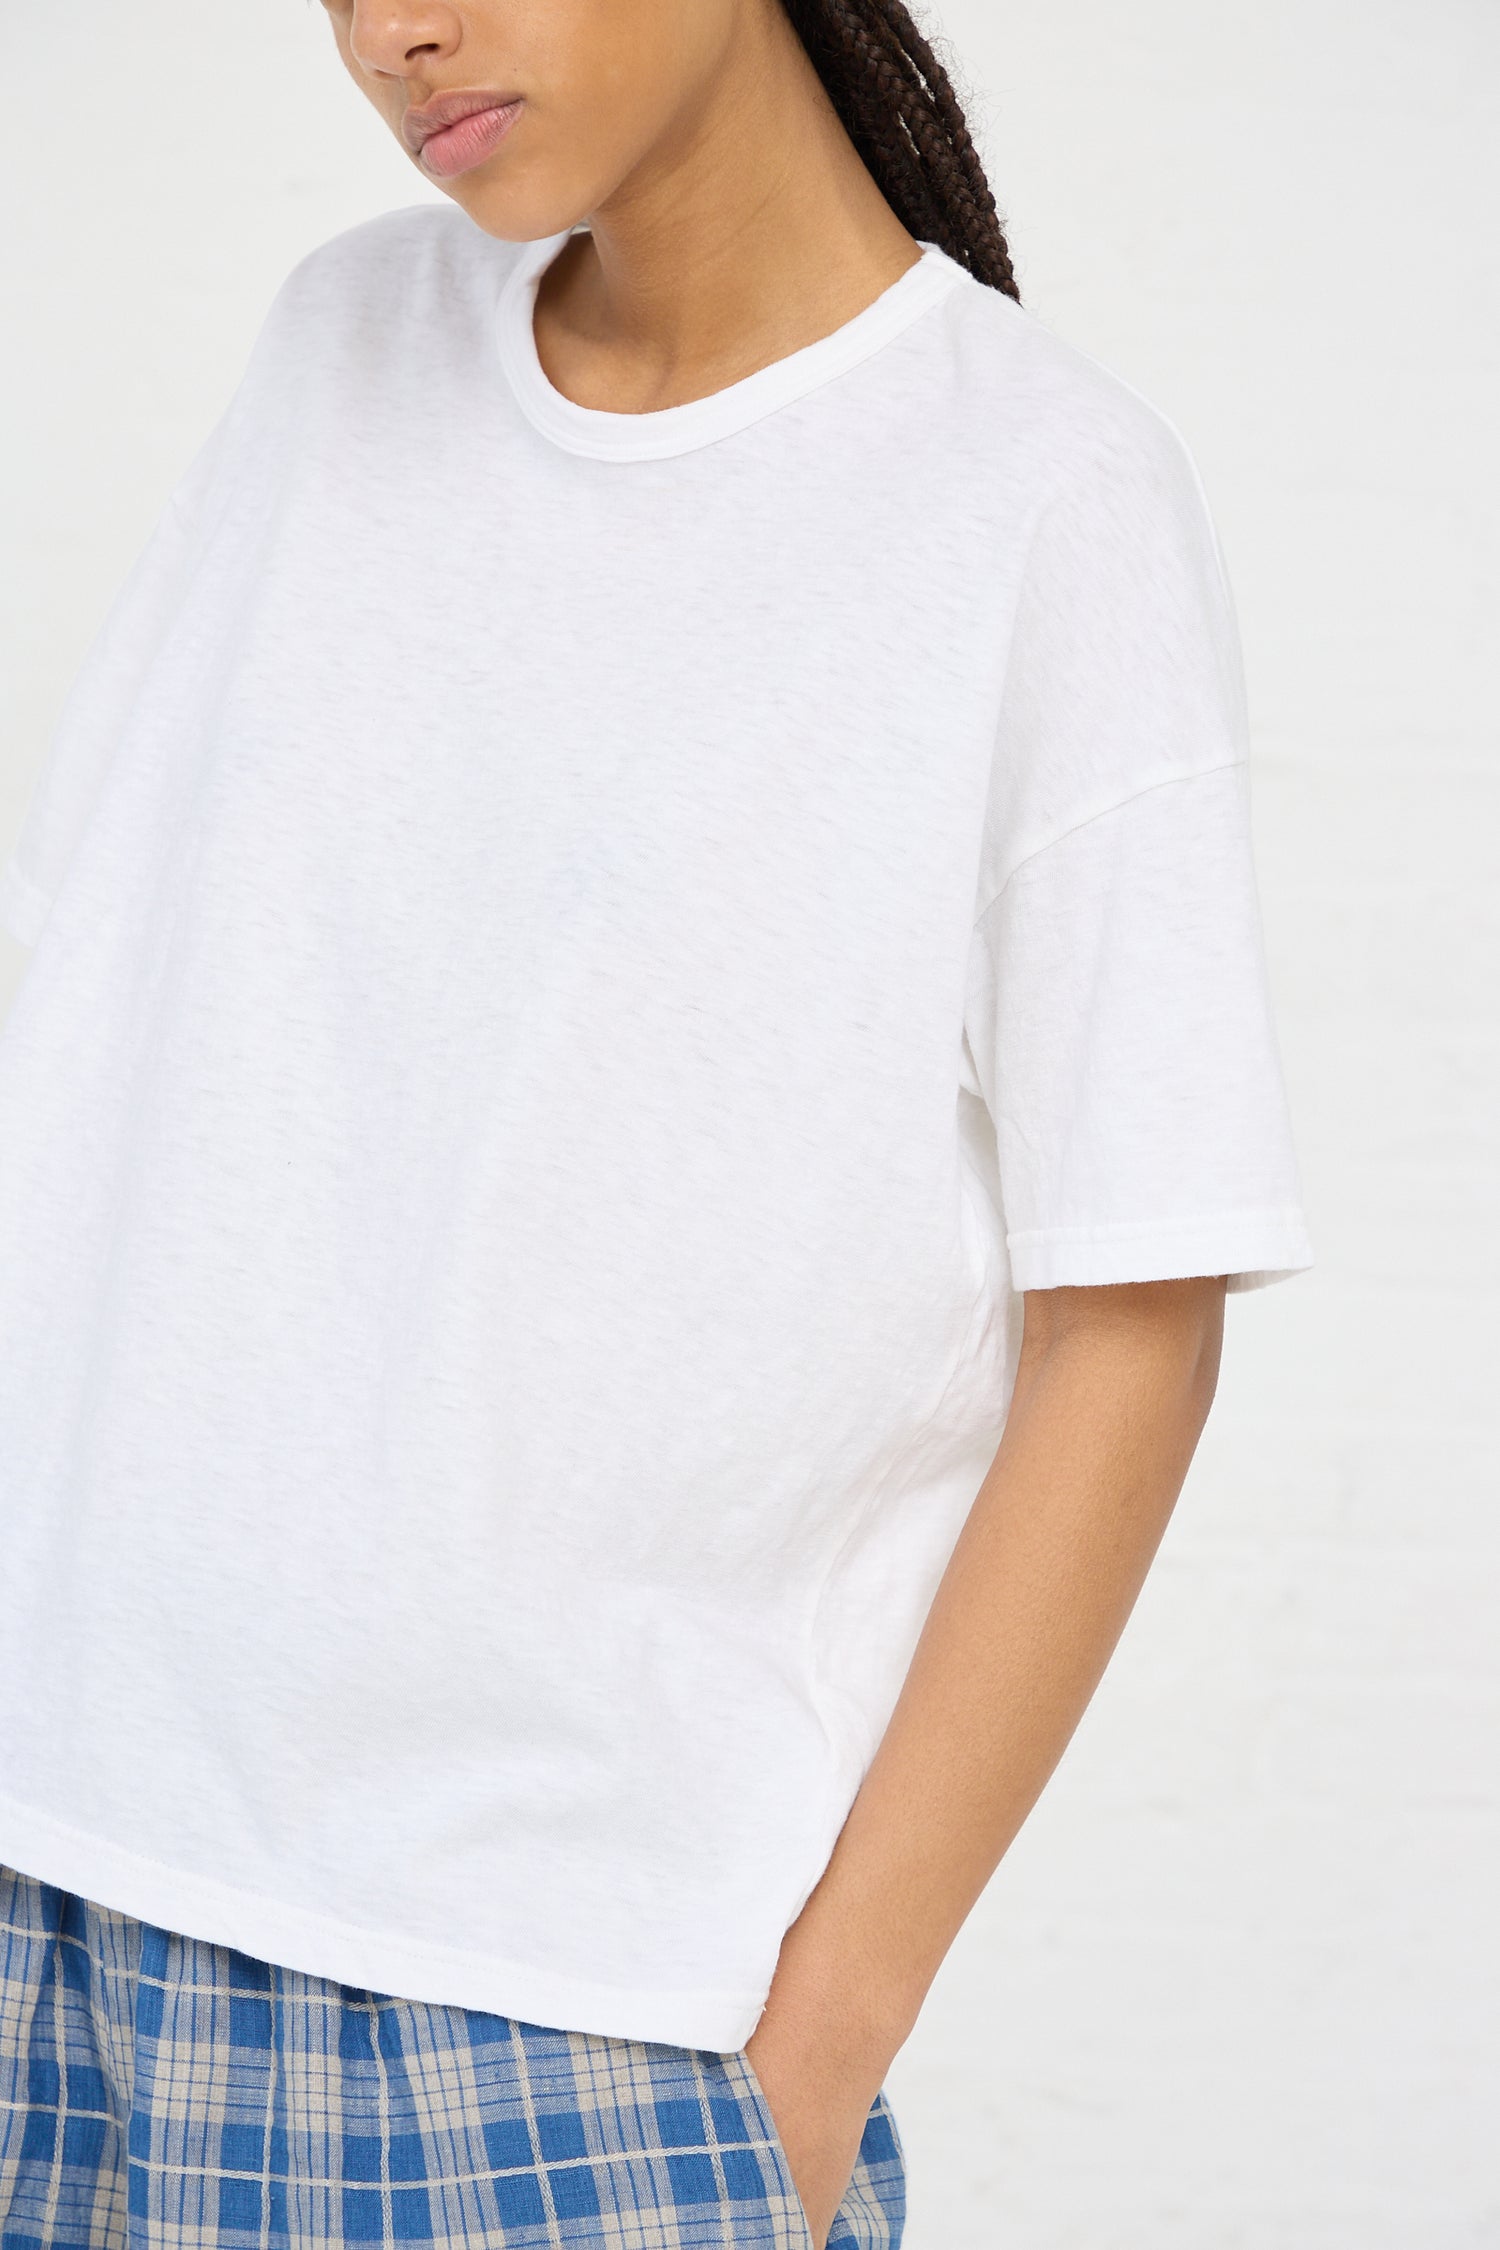 A person wearing an oversized Ichi Antiquités Cotton T-Shirt in White and plaid pants.